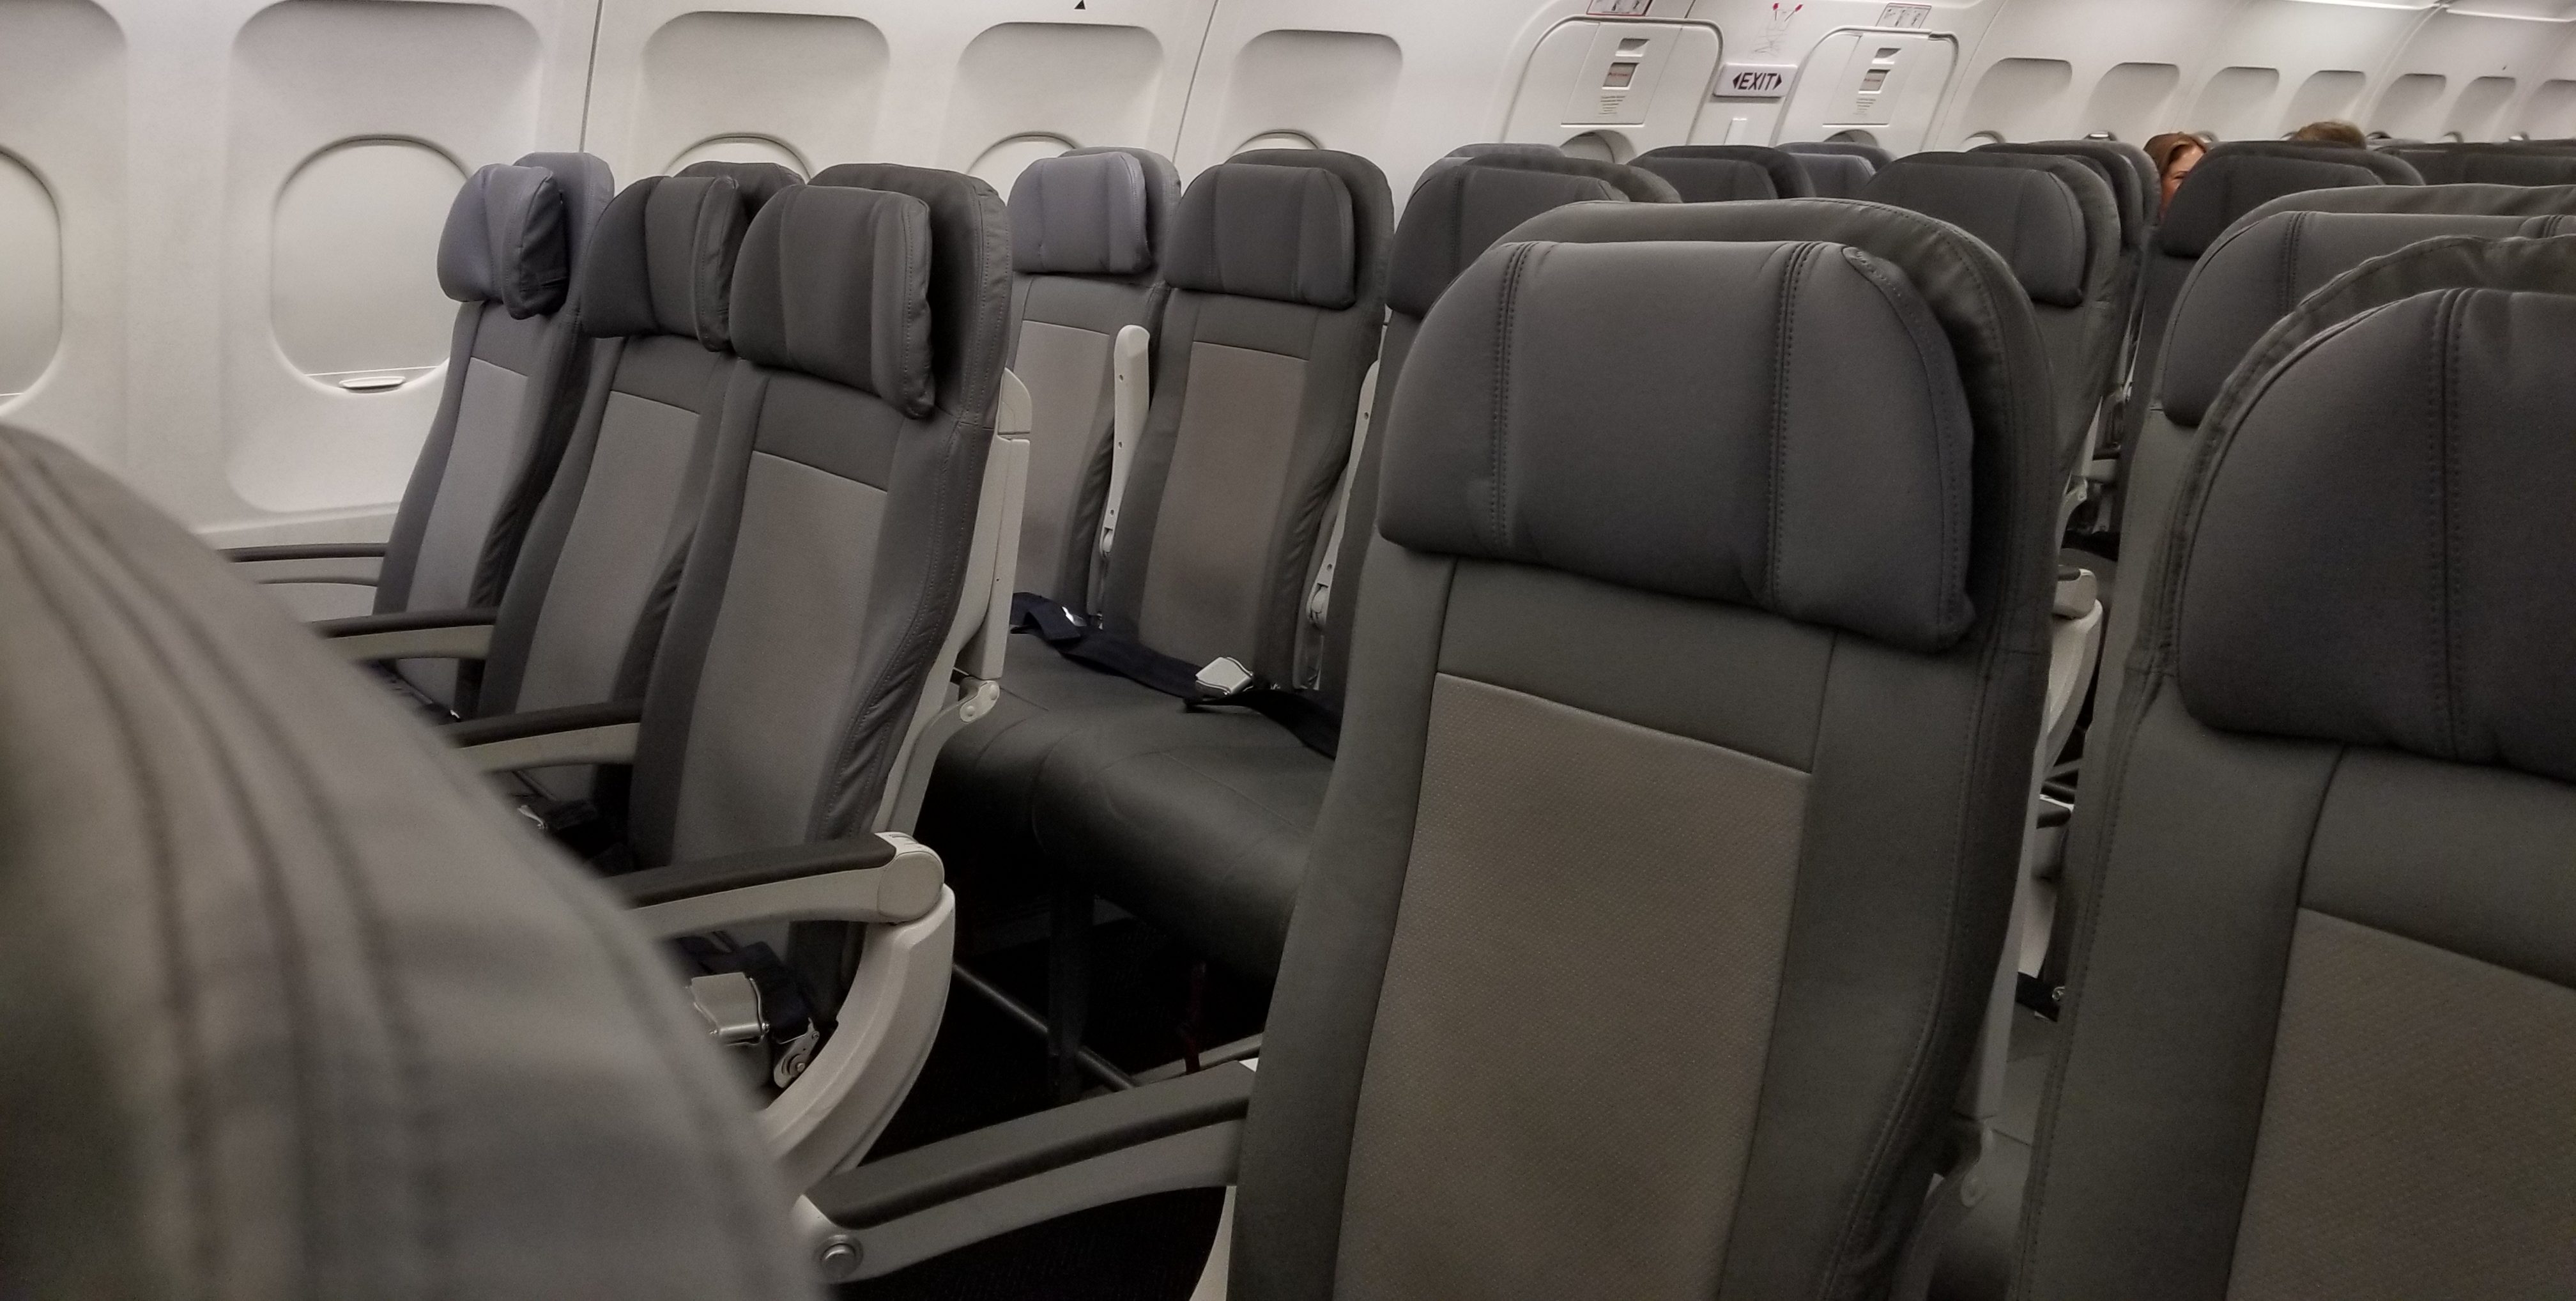                      Flight Review: United (Airbus A319) Economy Plus From San Francisco to Seattle                             
                     